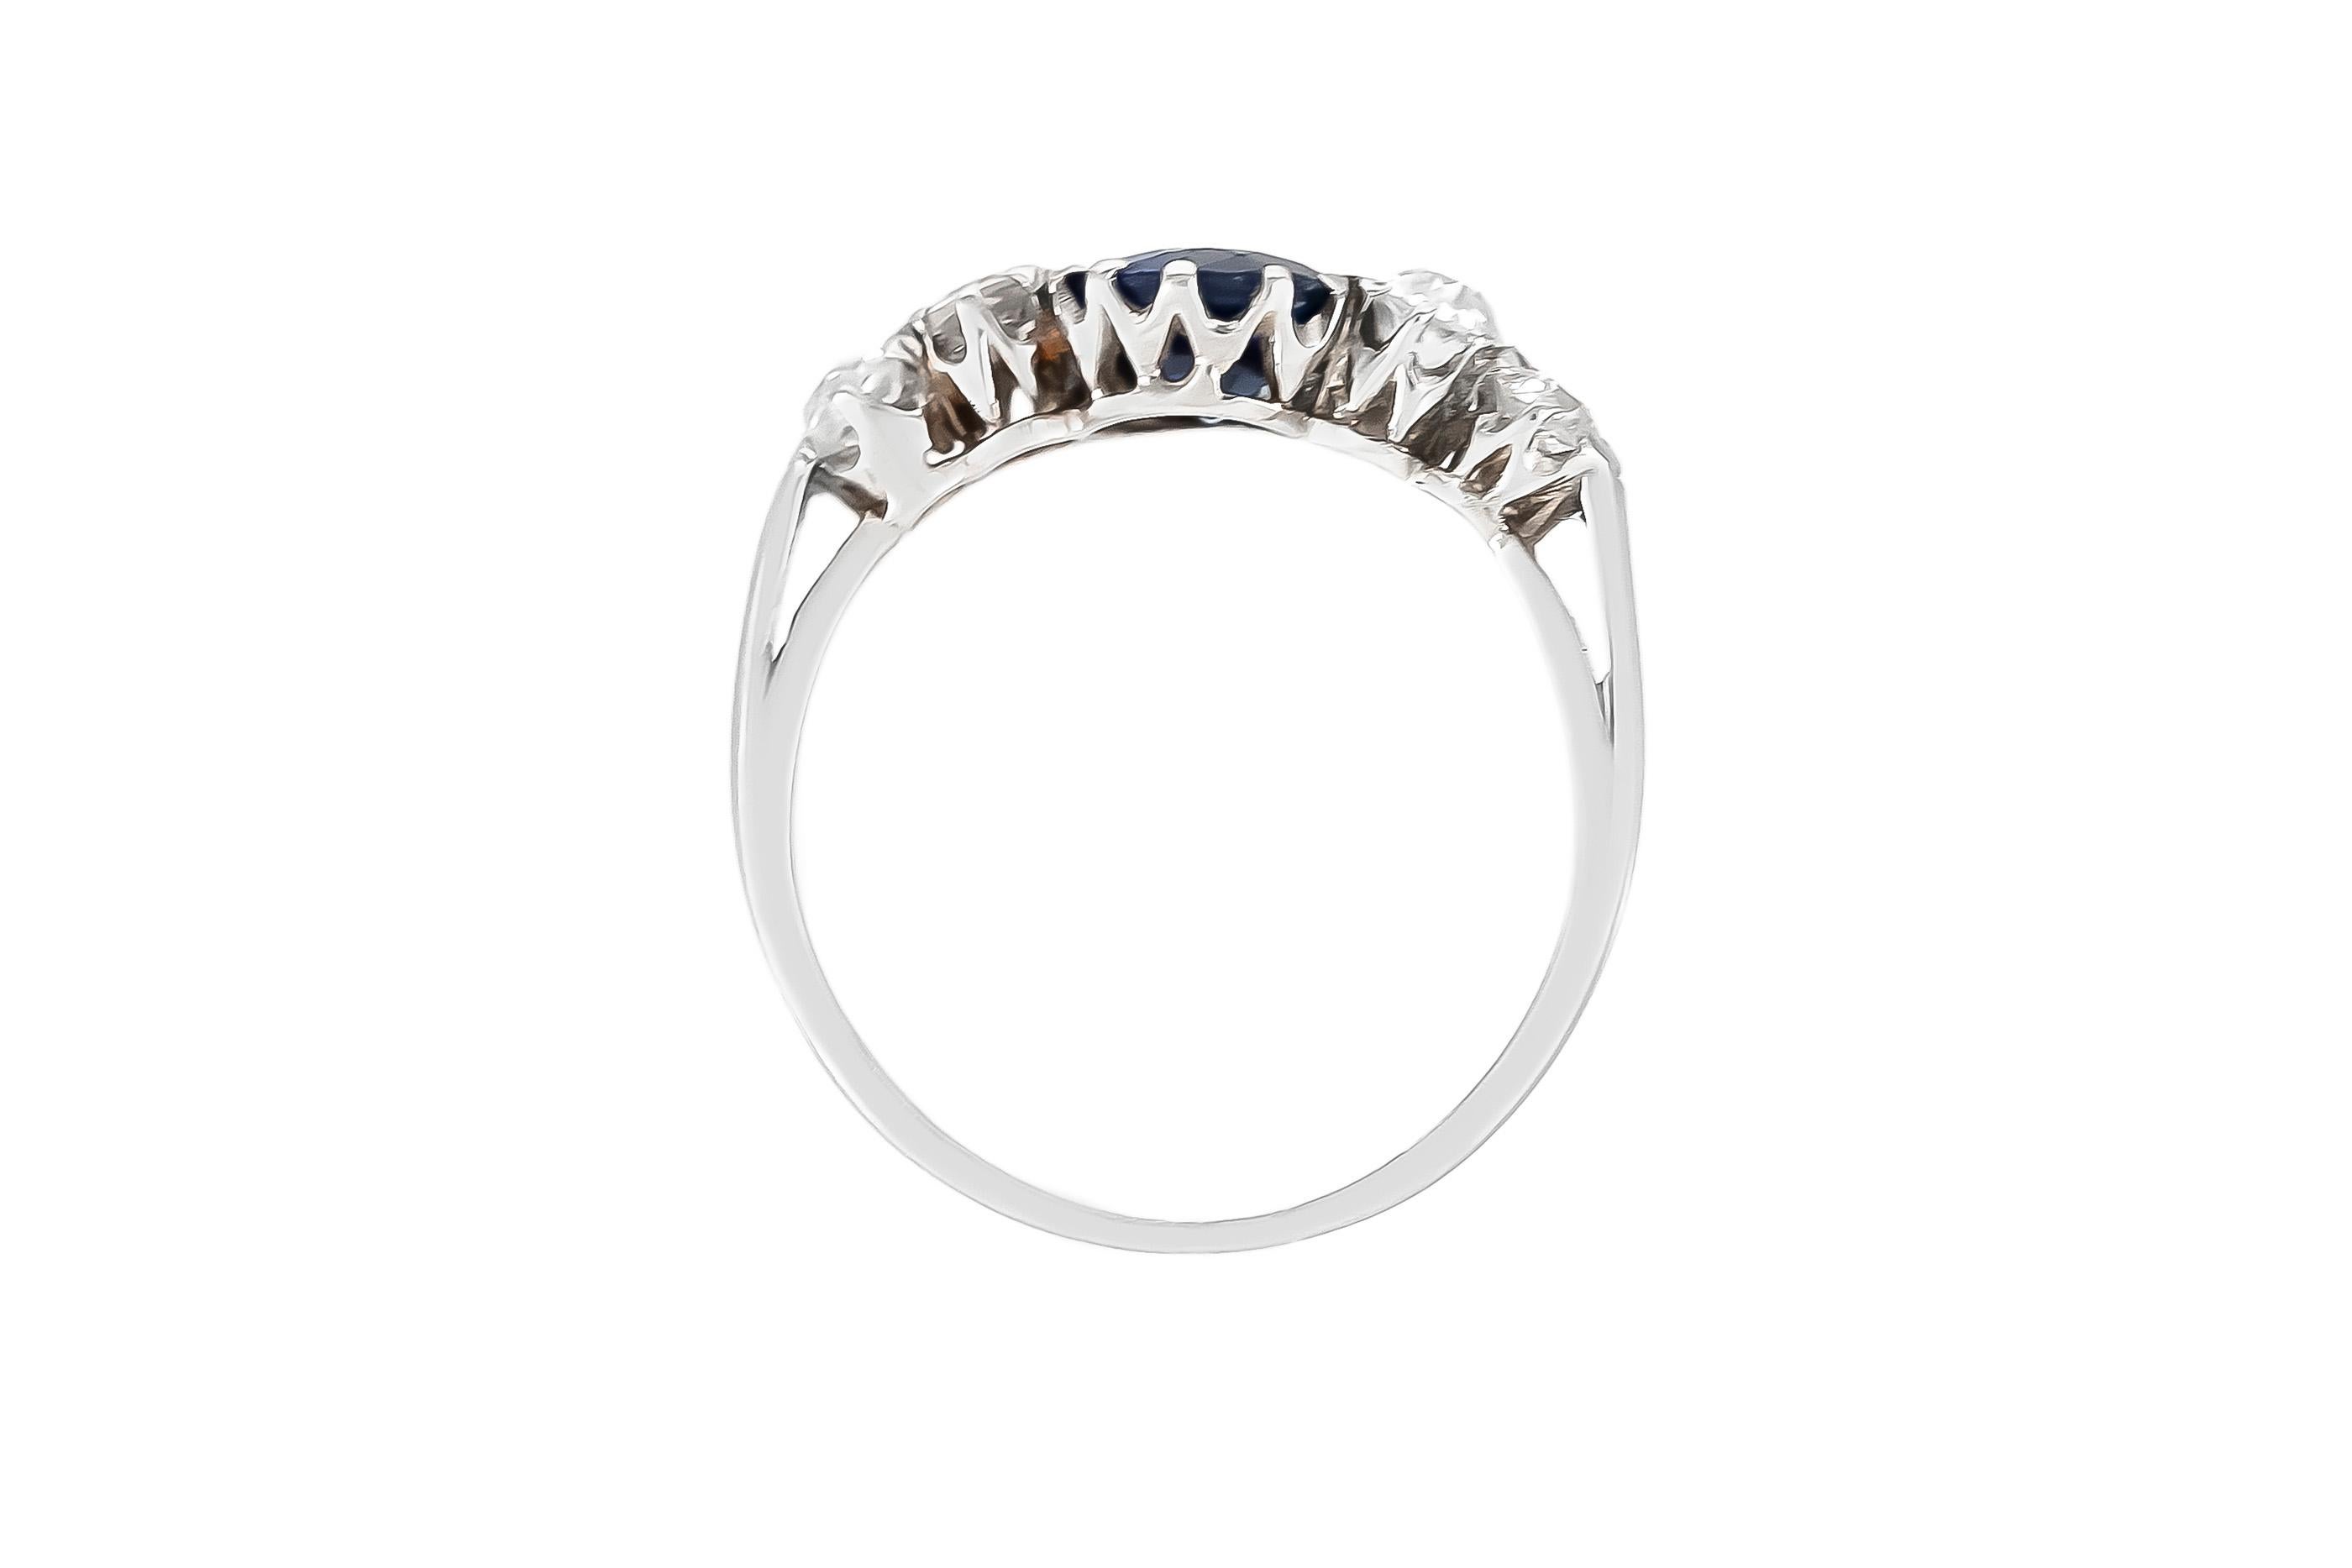 The ring is finely crafted in platinum with center sapphire weighing approximately total of 1.00 carat and diamonds weighing approximately total of 0.50 carat.
Circa 1970.